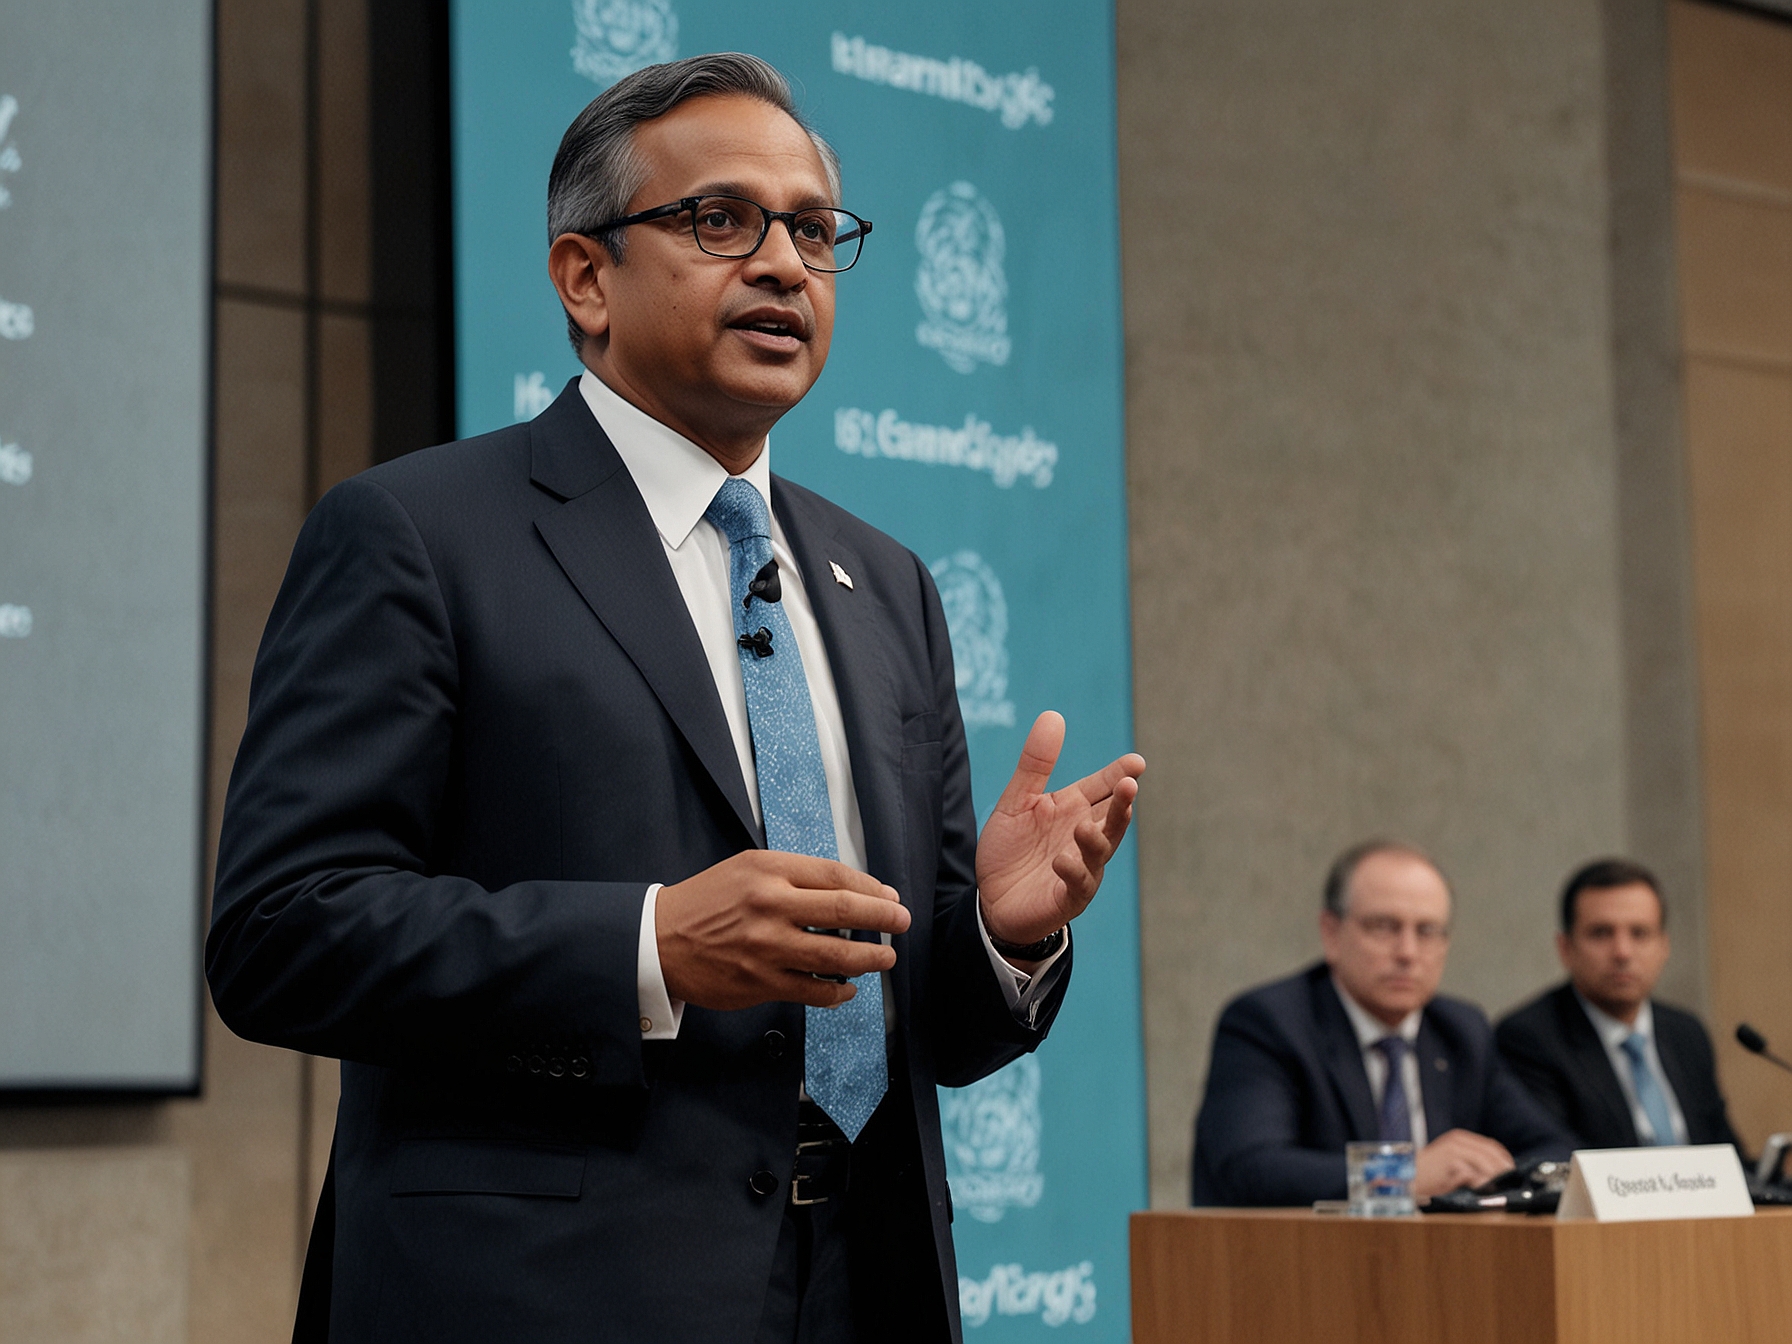 A photo of Barclays CEO C.S. Venkatakrishnan speaking at the Bloomberg Sustainable Finance Forum, emphasizing the complexities of transitioning from fossil fuels to renewable energy.